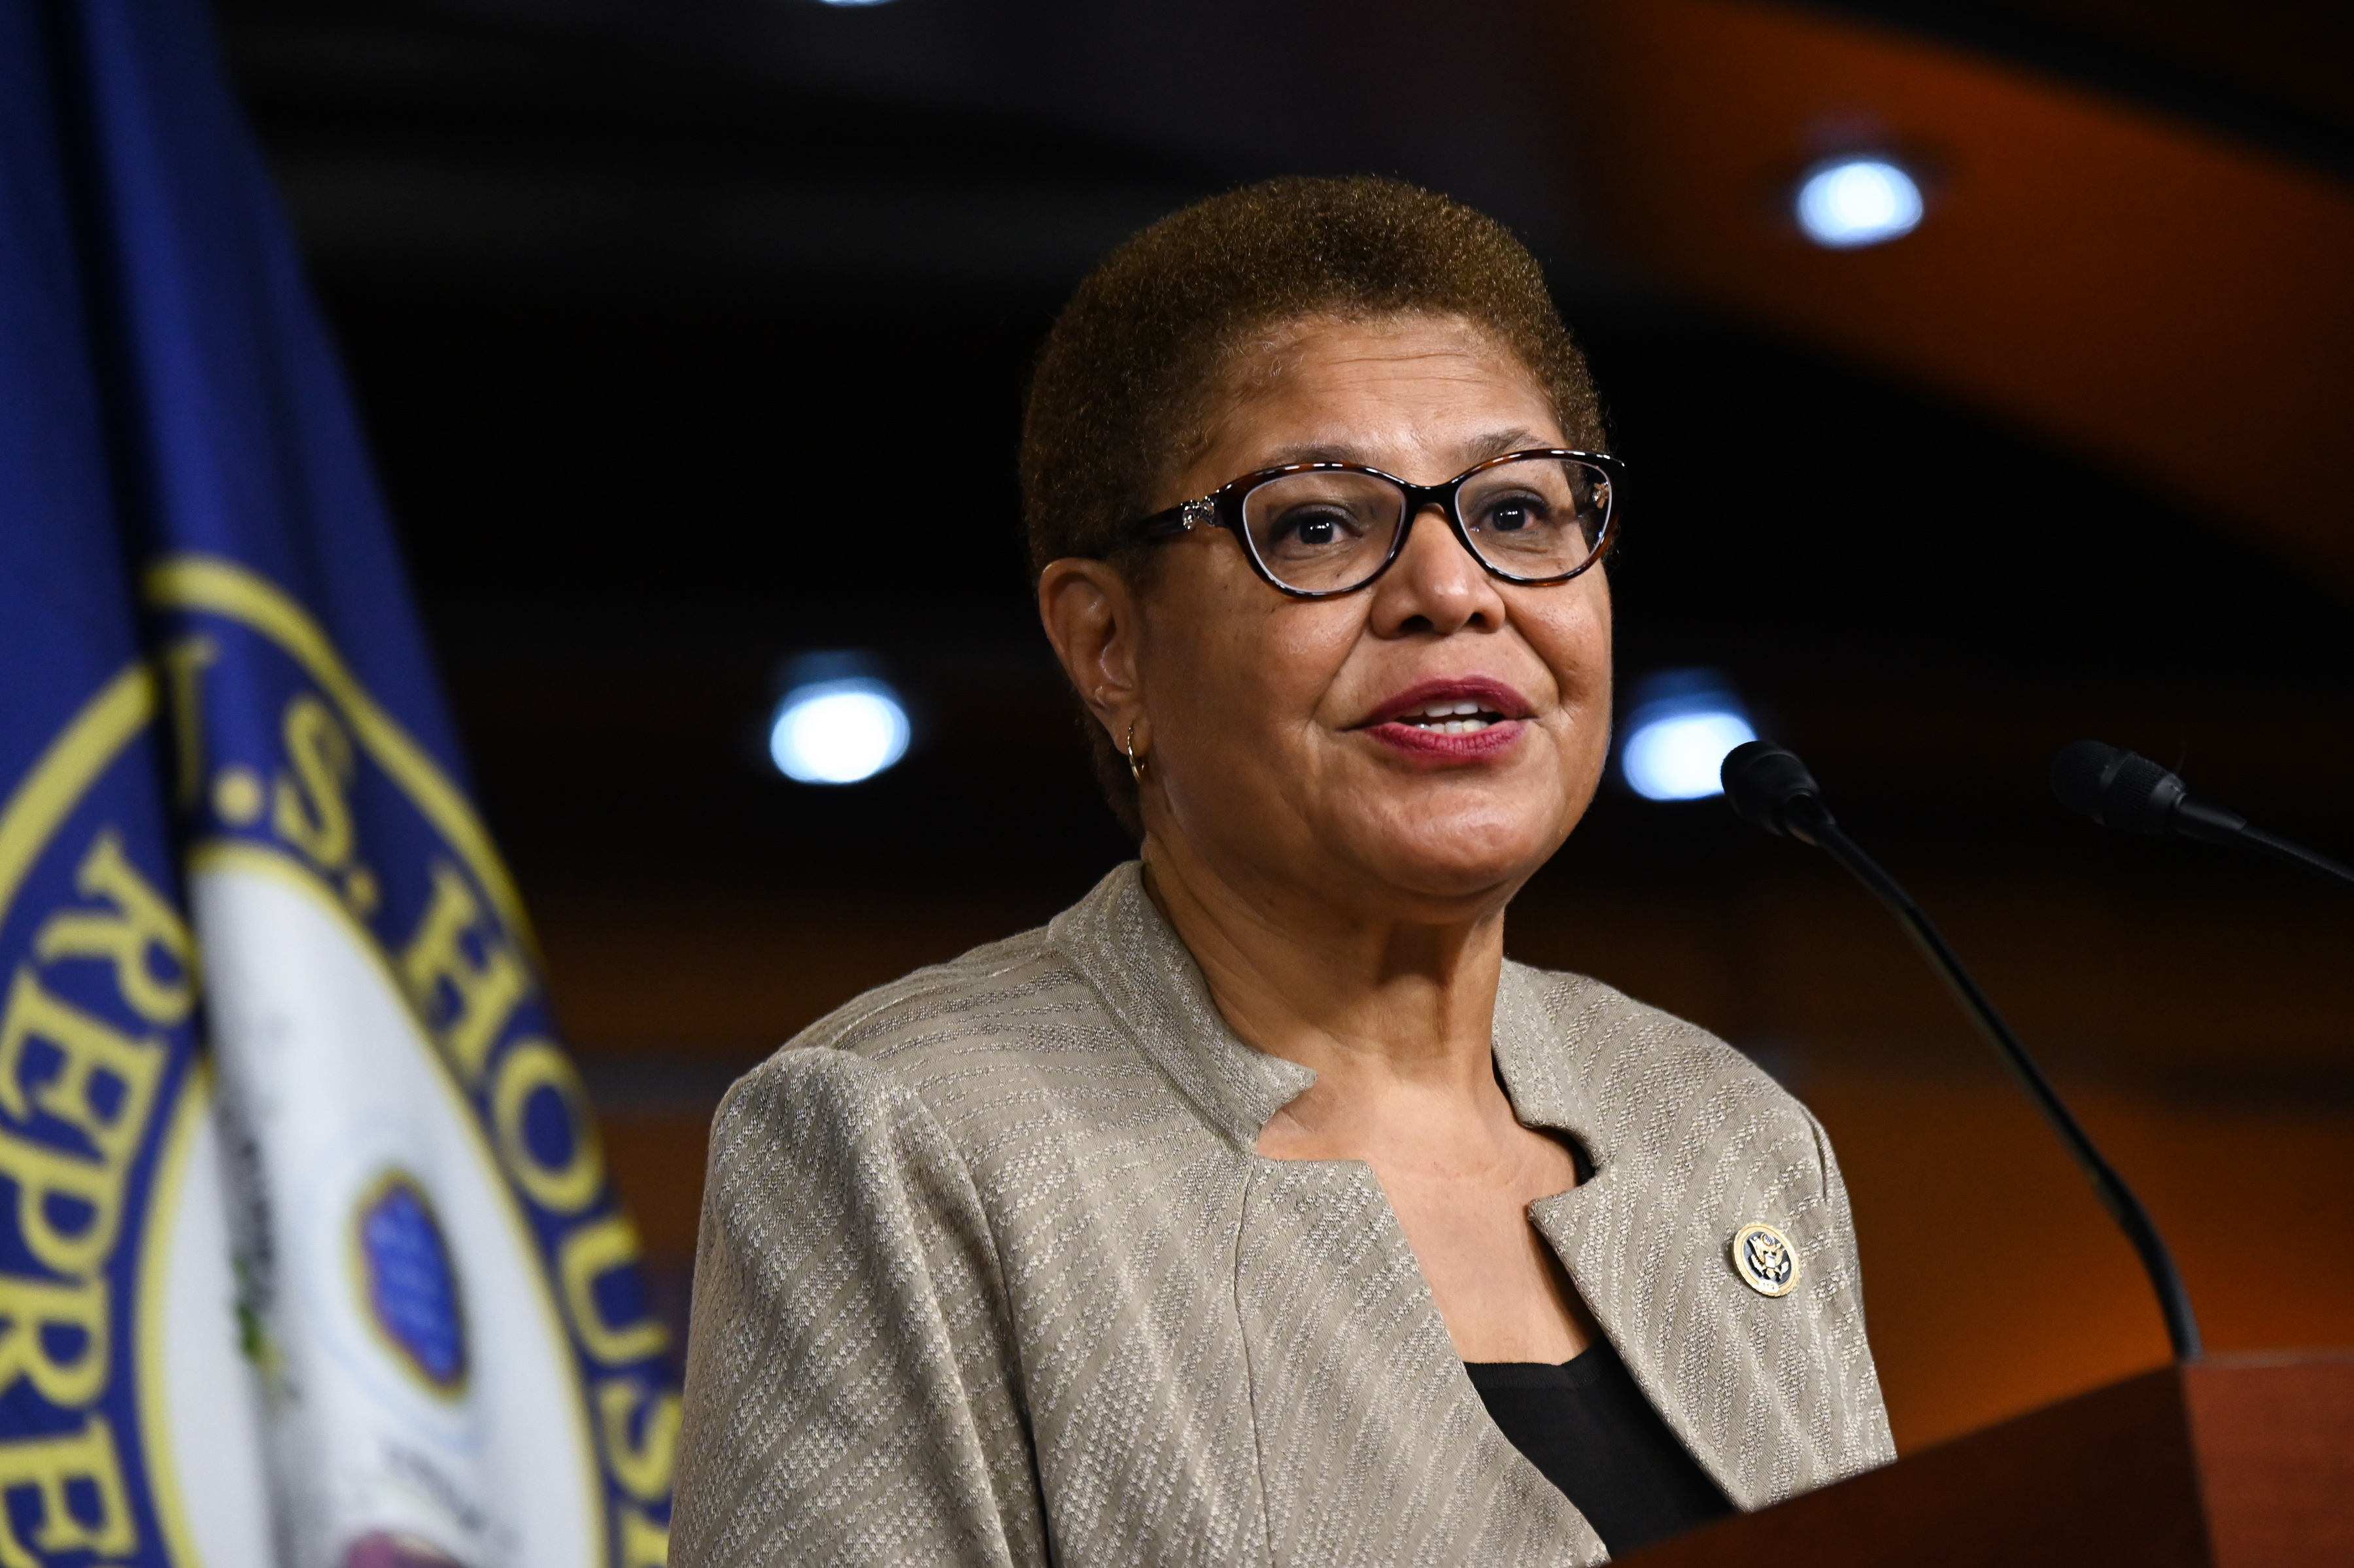 Mayor Karen Bass Says Encampments in LA Should Be ‘Significantly Down' in Four Years